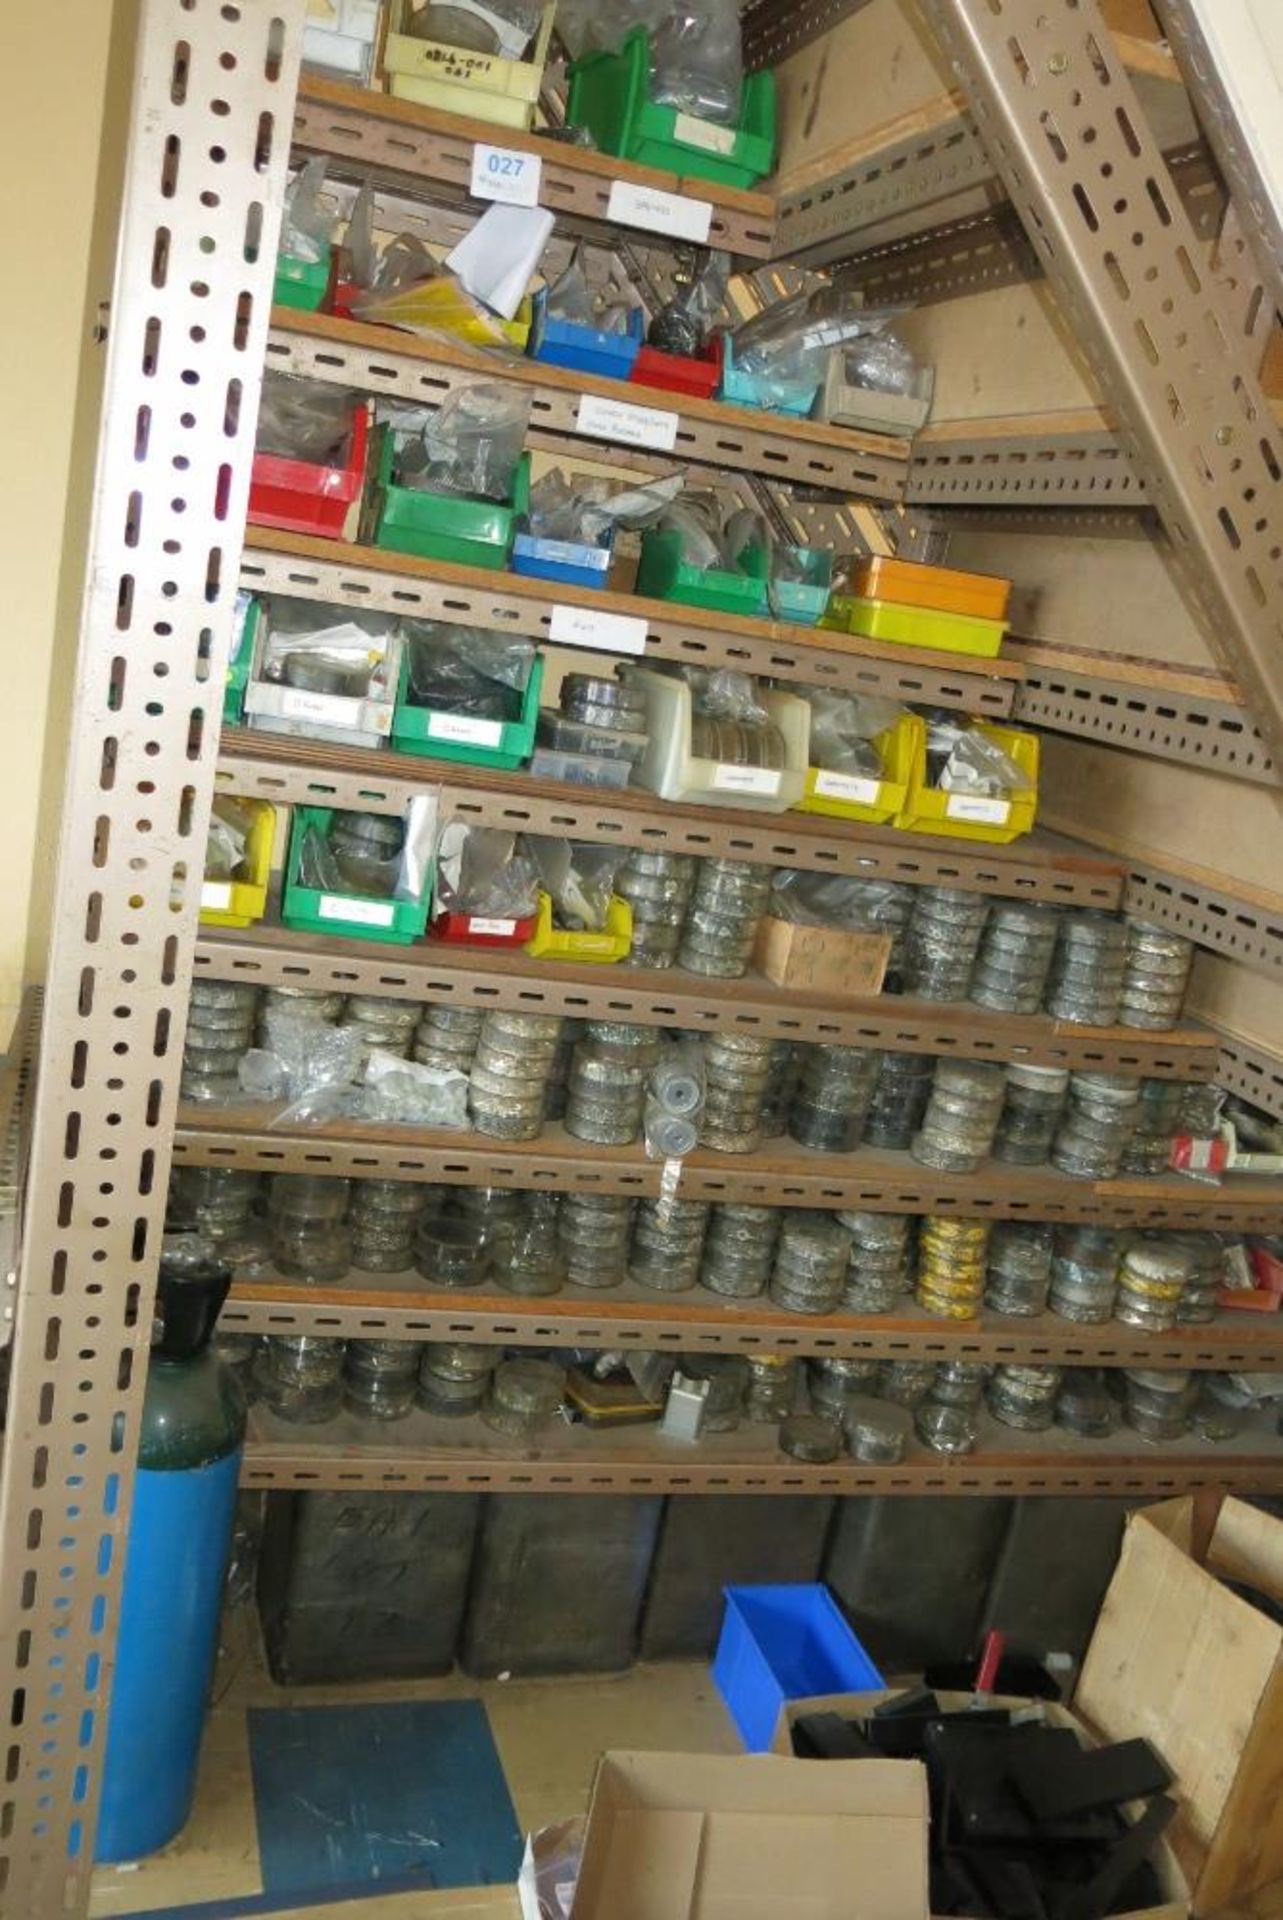 Contents of shelves under stairs comprising electrical connectors. rivets, springs, o-rings etc. - Image 2 of 2